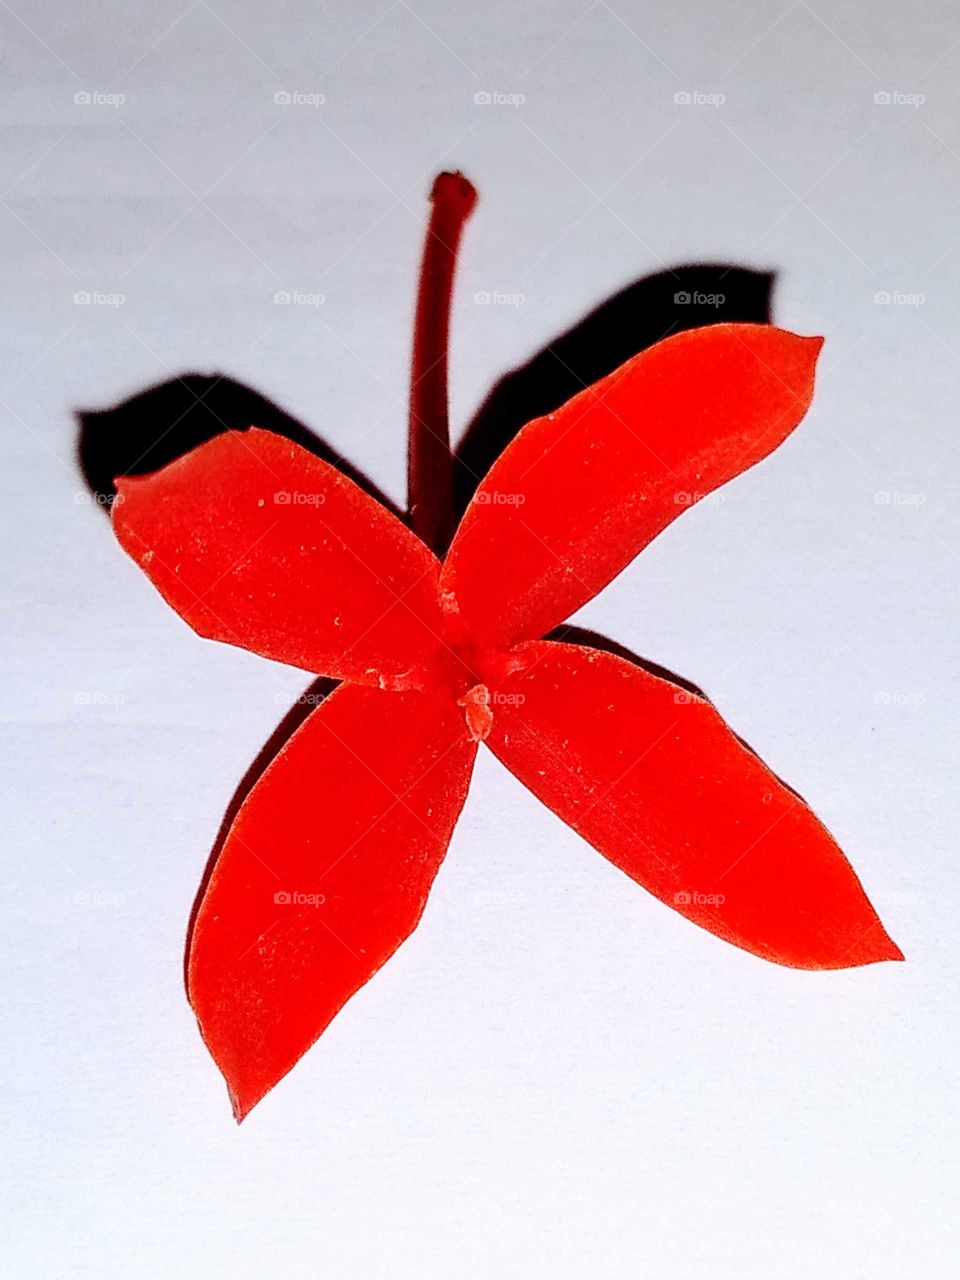 a small red flower